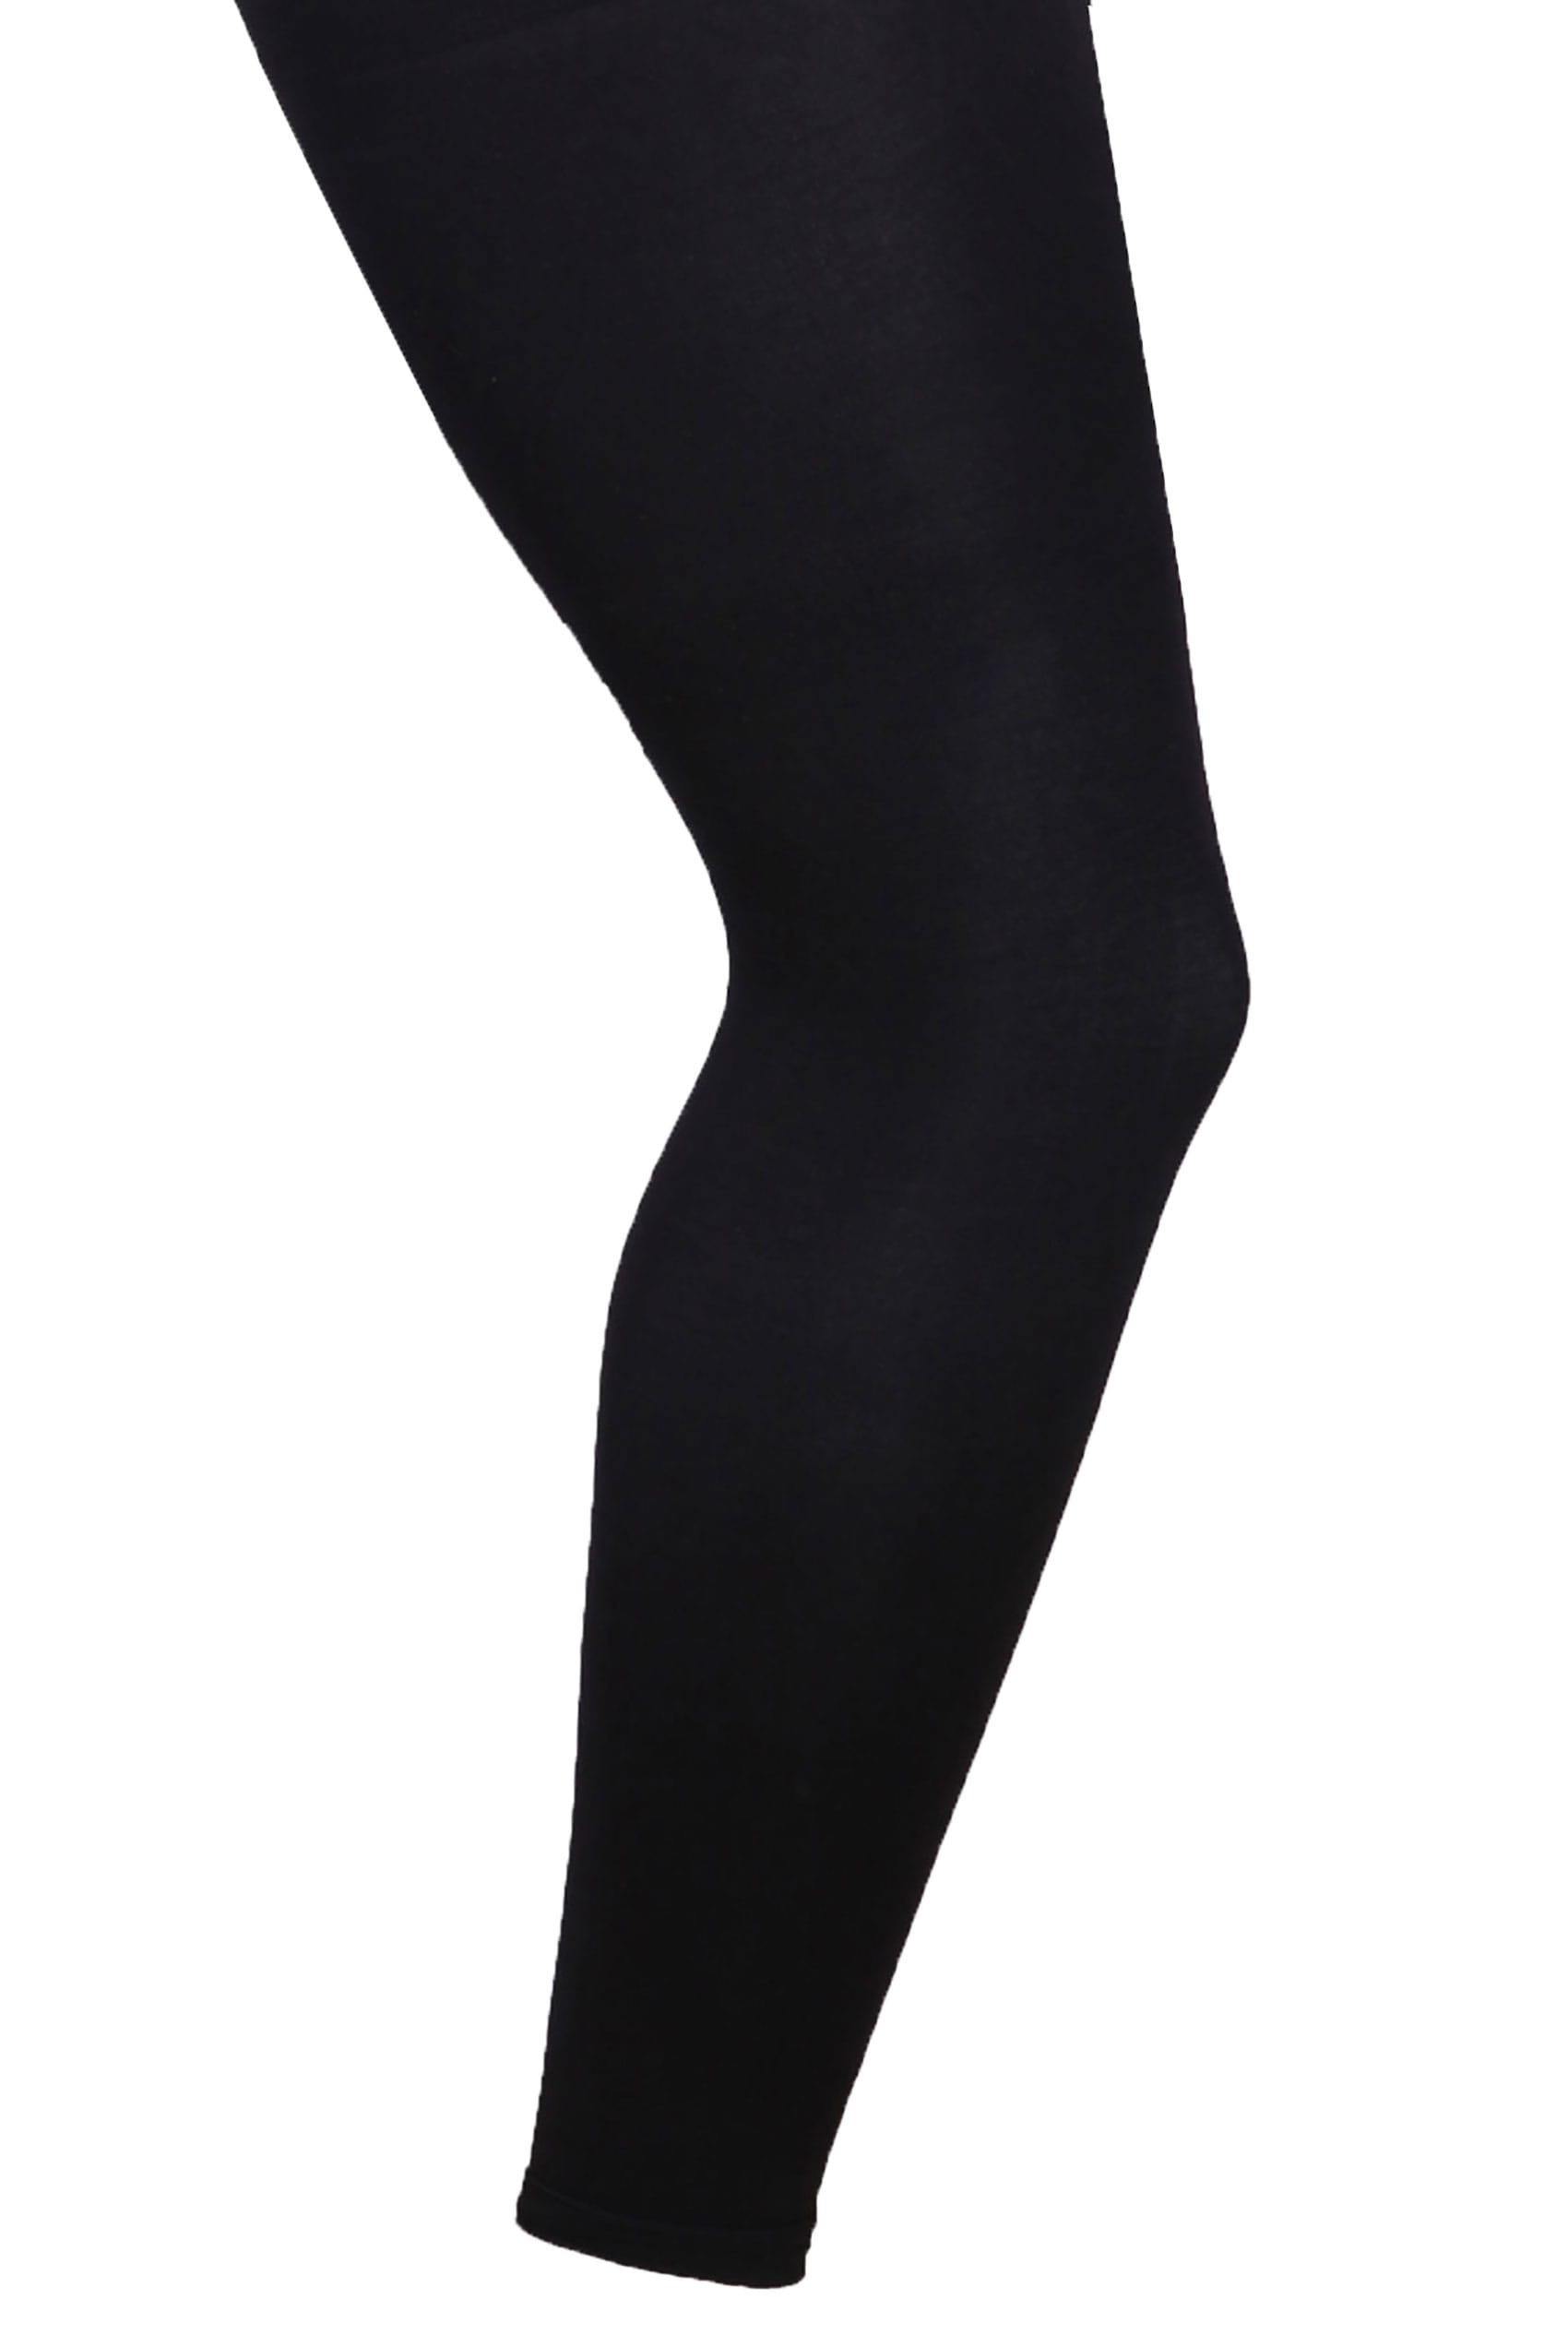 Black Footless 80 Denier Tights, Plus size 16 to 32